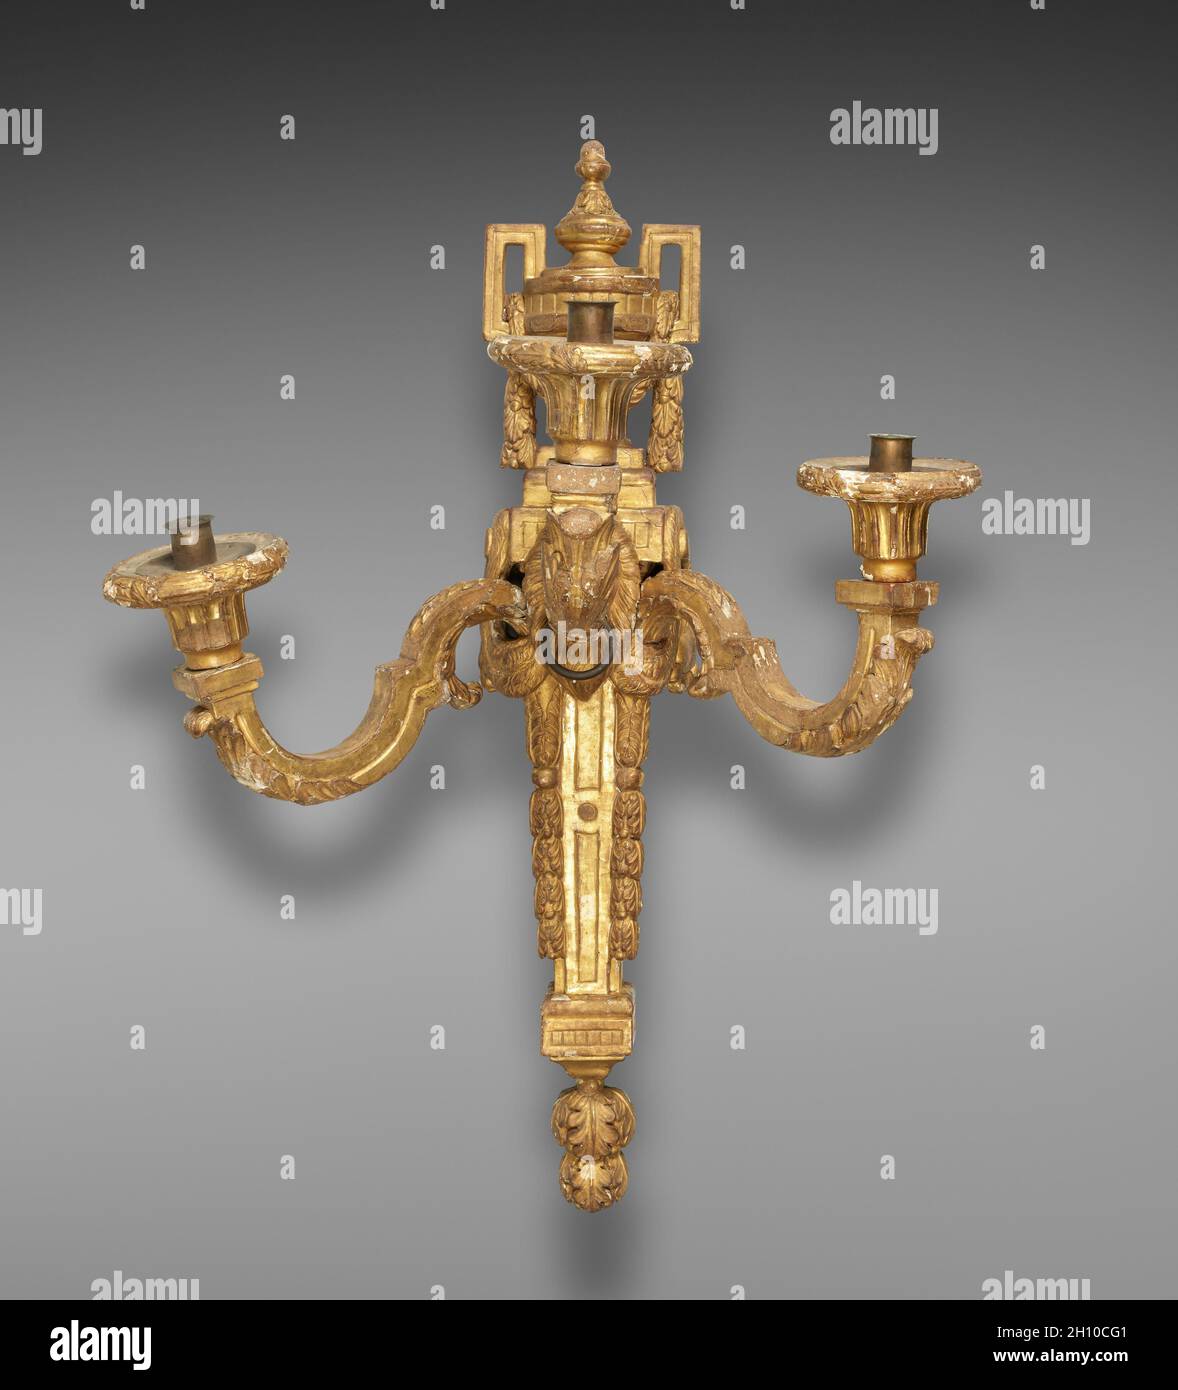 Candle Bracket, c. 1765-1775. After a design by Jean Charles Delafosse (French, 1734-1789). Carved and gilded wood; overall: 89.2 x 63.5 x 45.1 cm (35 1/8 x 25 x 17 3/4 in.). Stock Photo